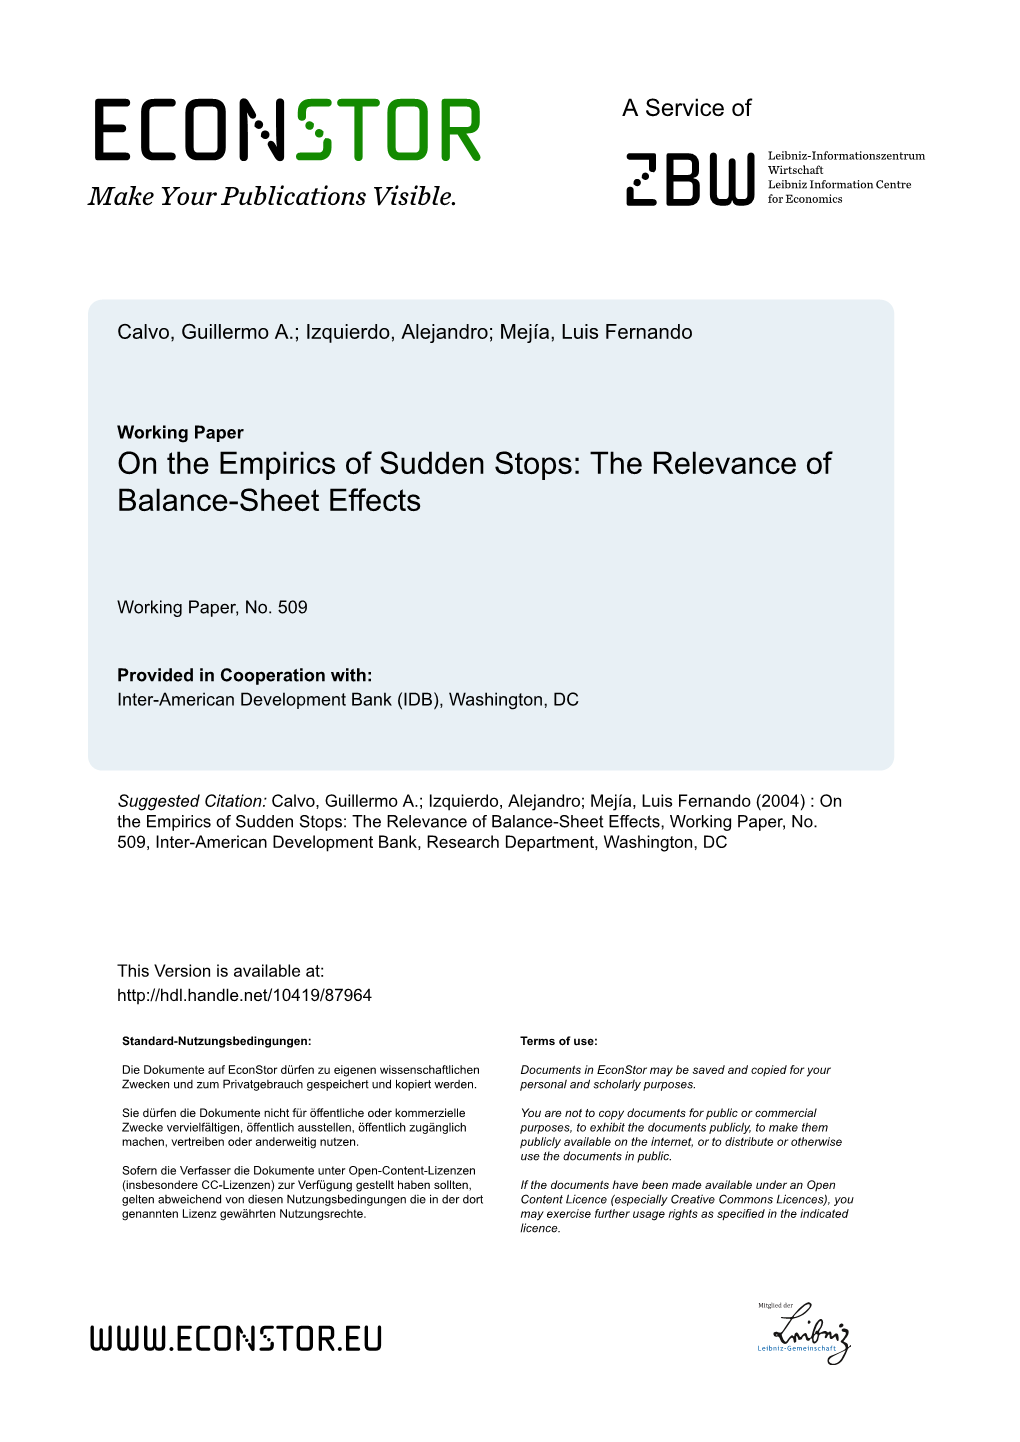 On the Empirics of Sudden Stops: the Relevance of Balance-Sheet Effects